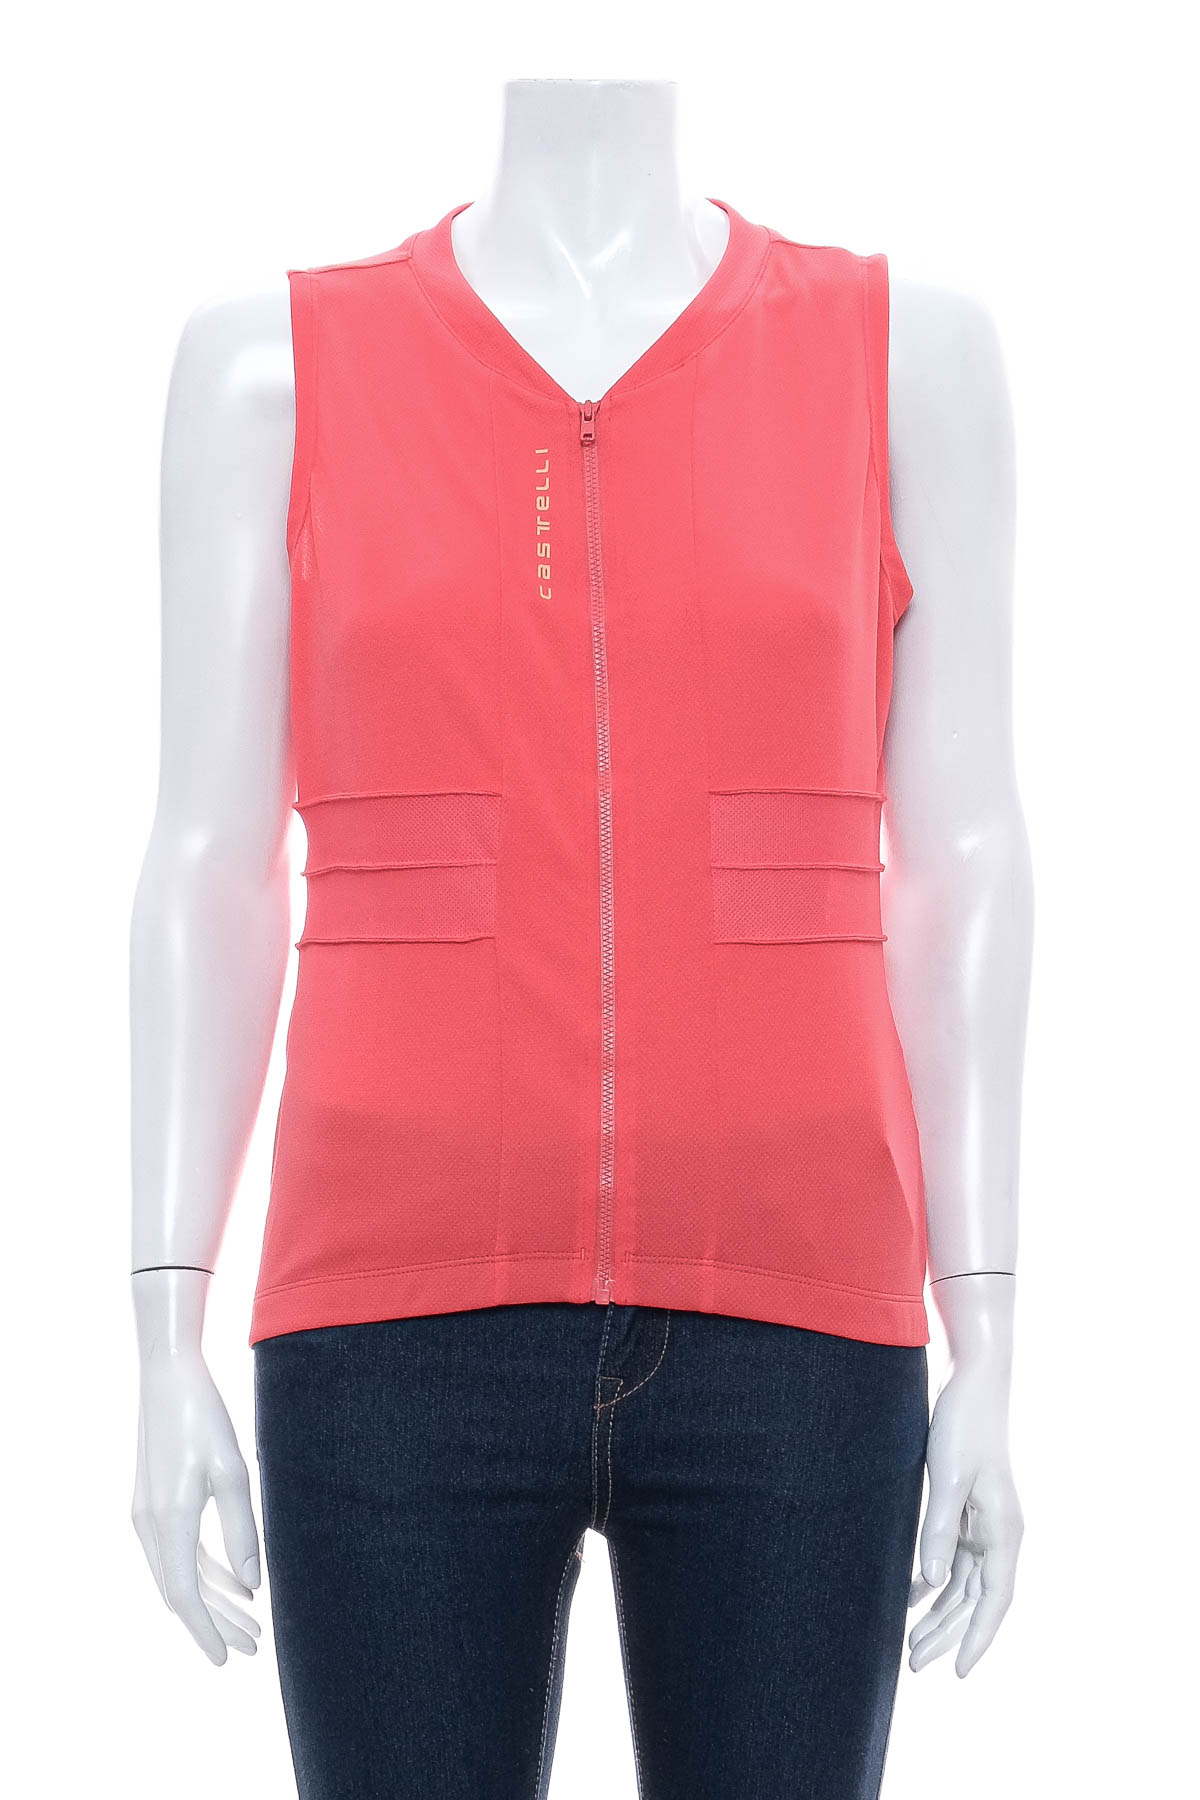 Women's vest for cycling - Castelli - 0